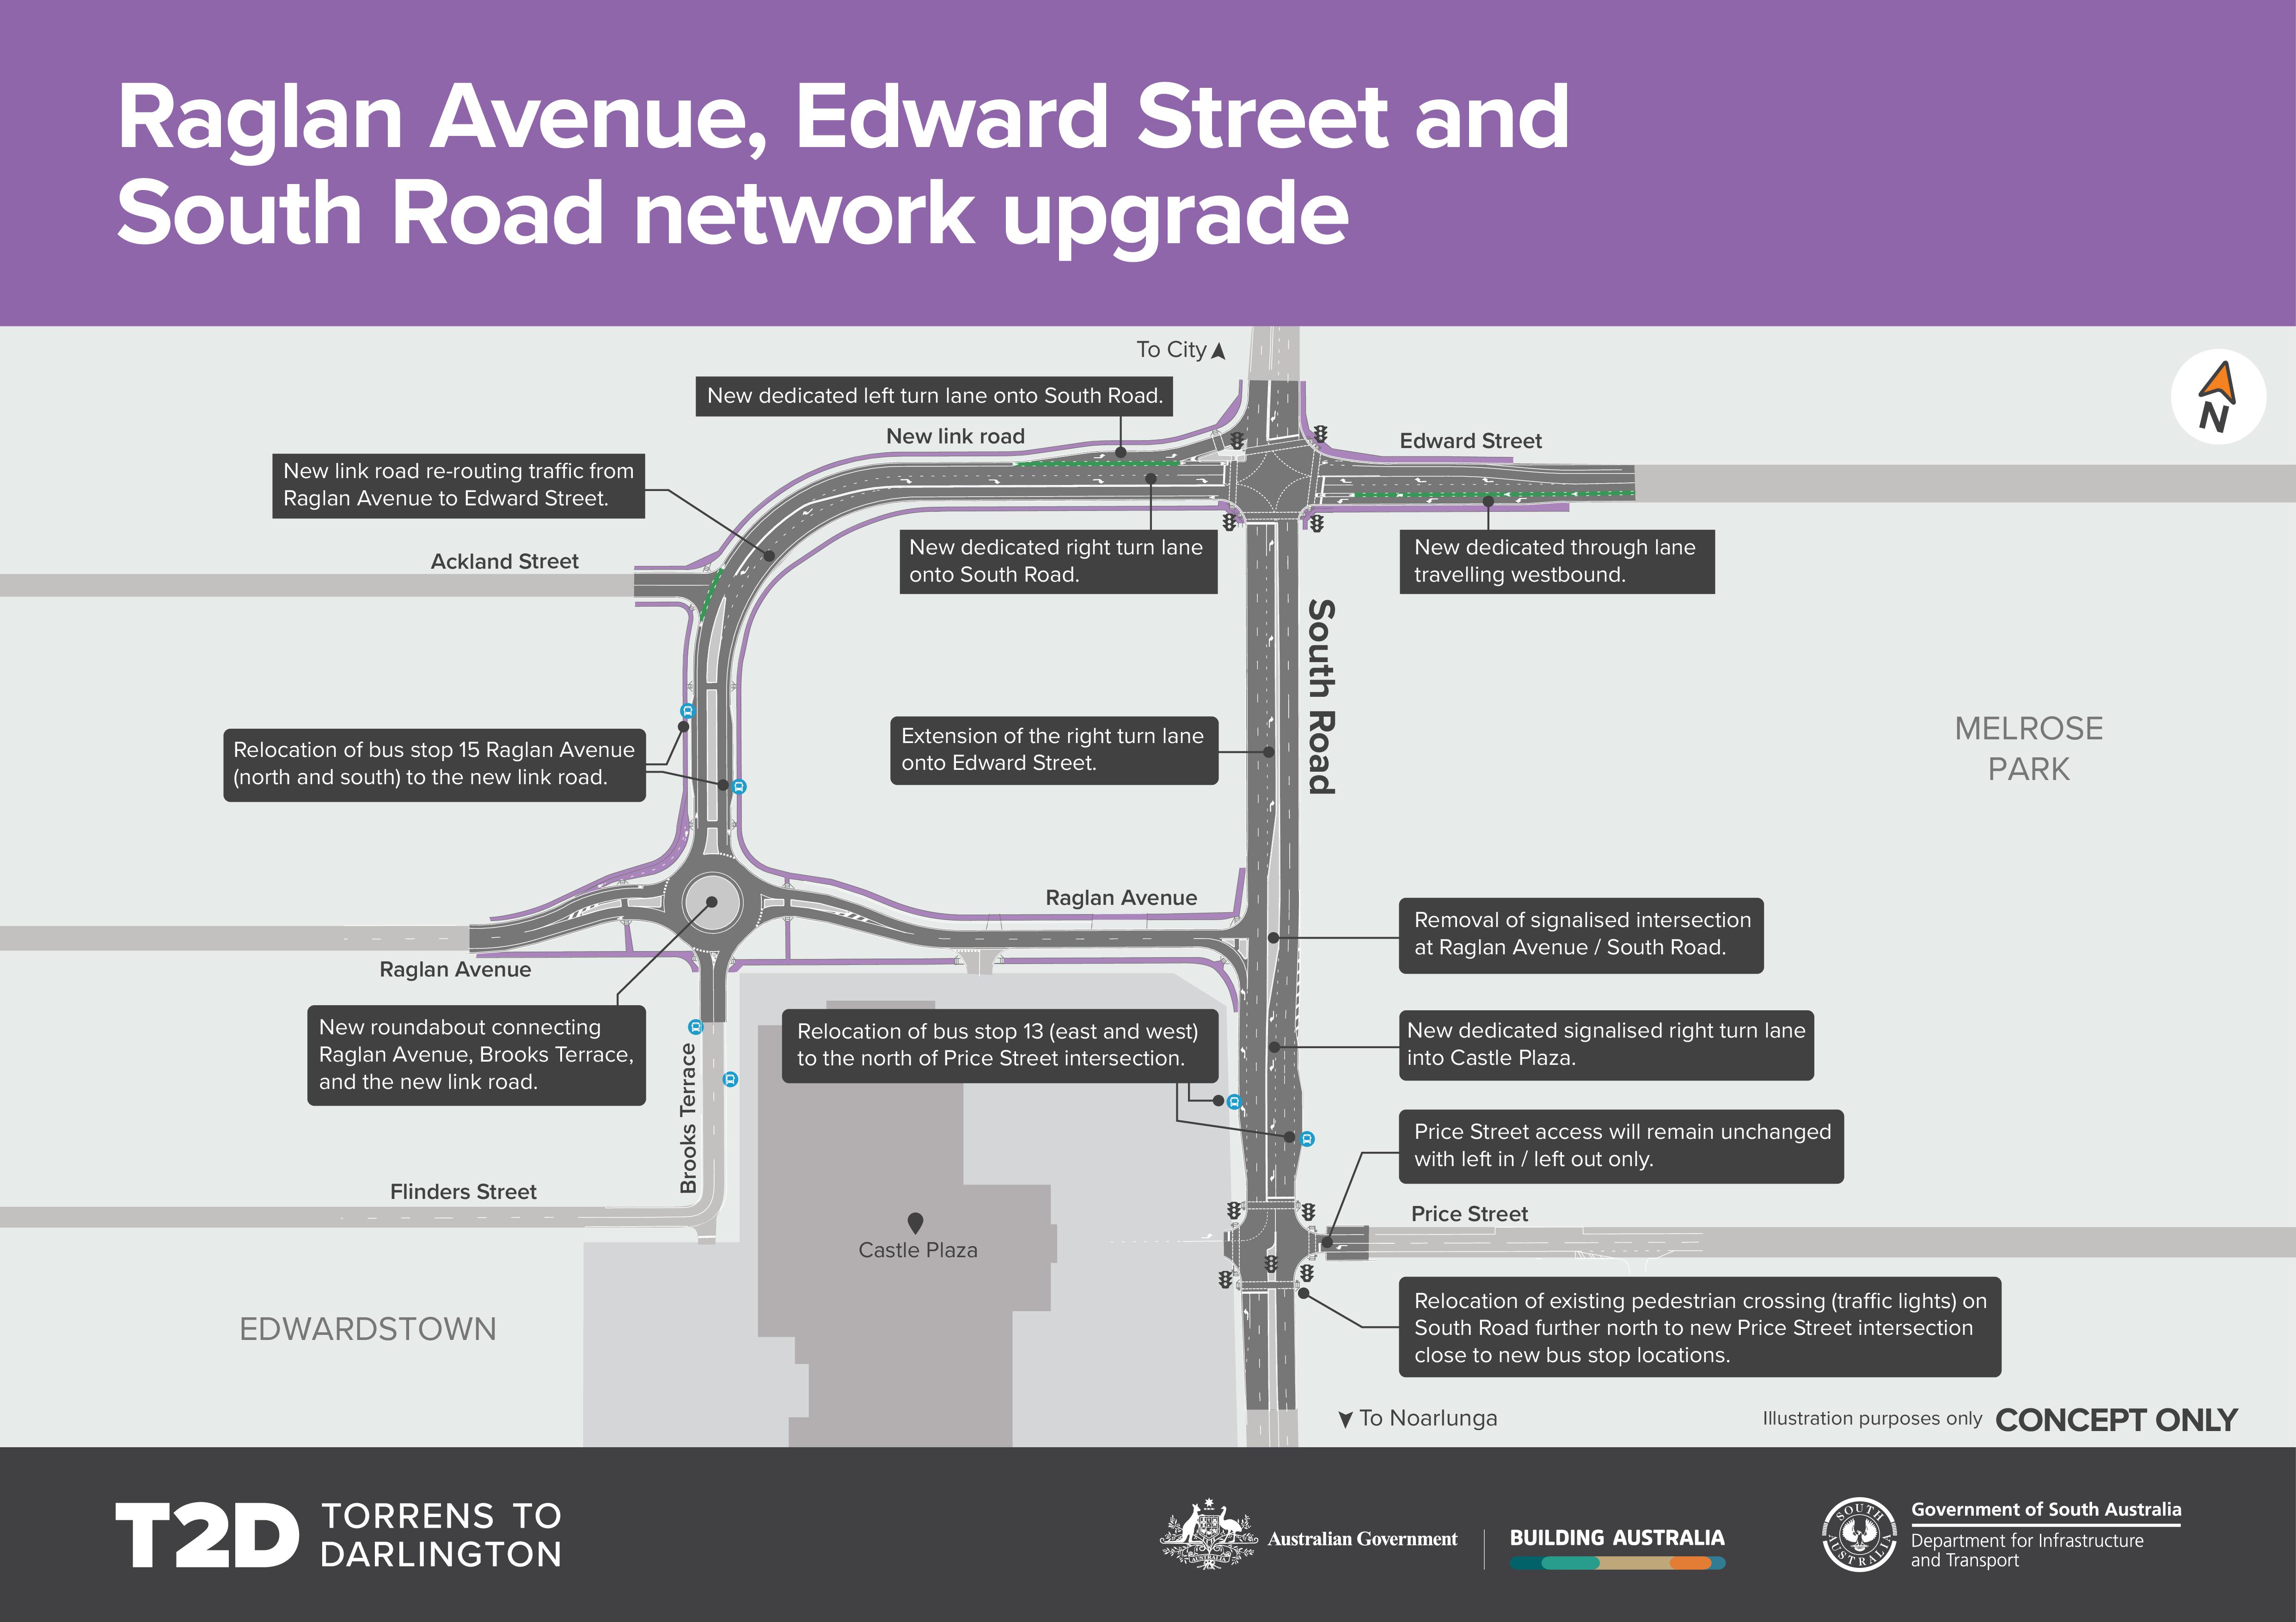 Raglan Ave, Edward St and South Rd network upgrade concept plan